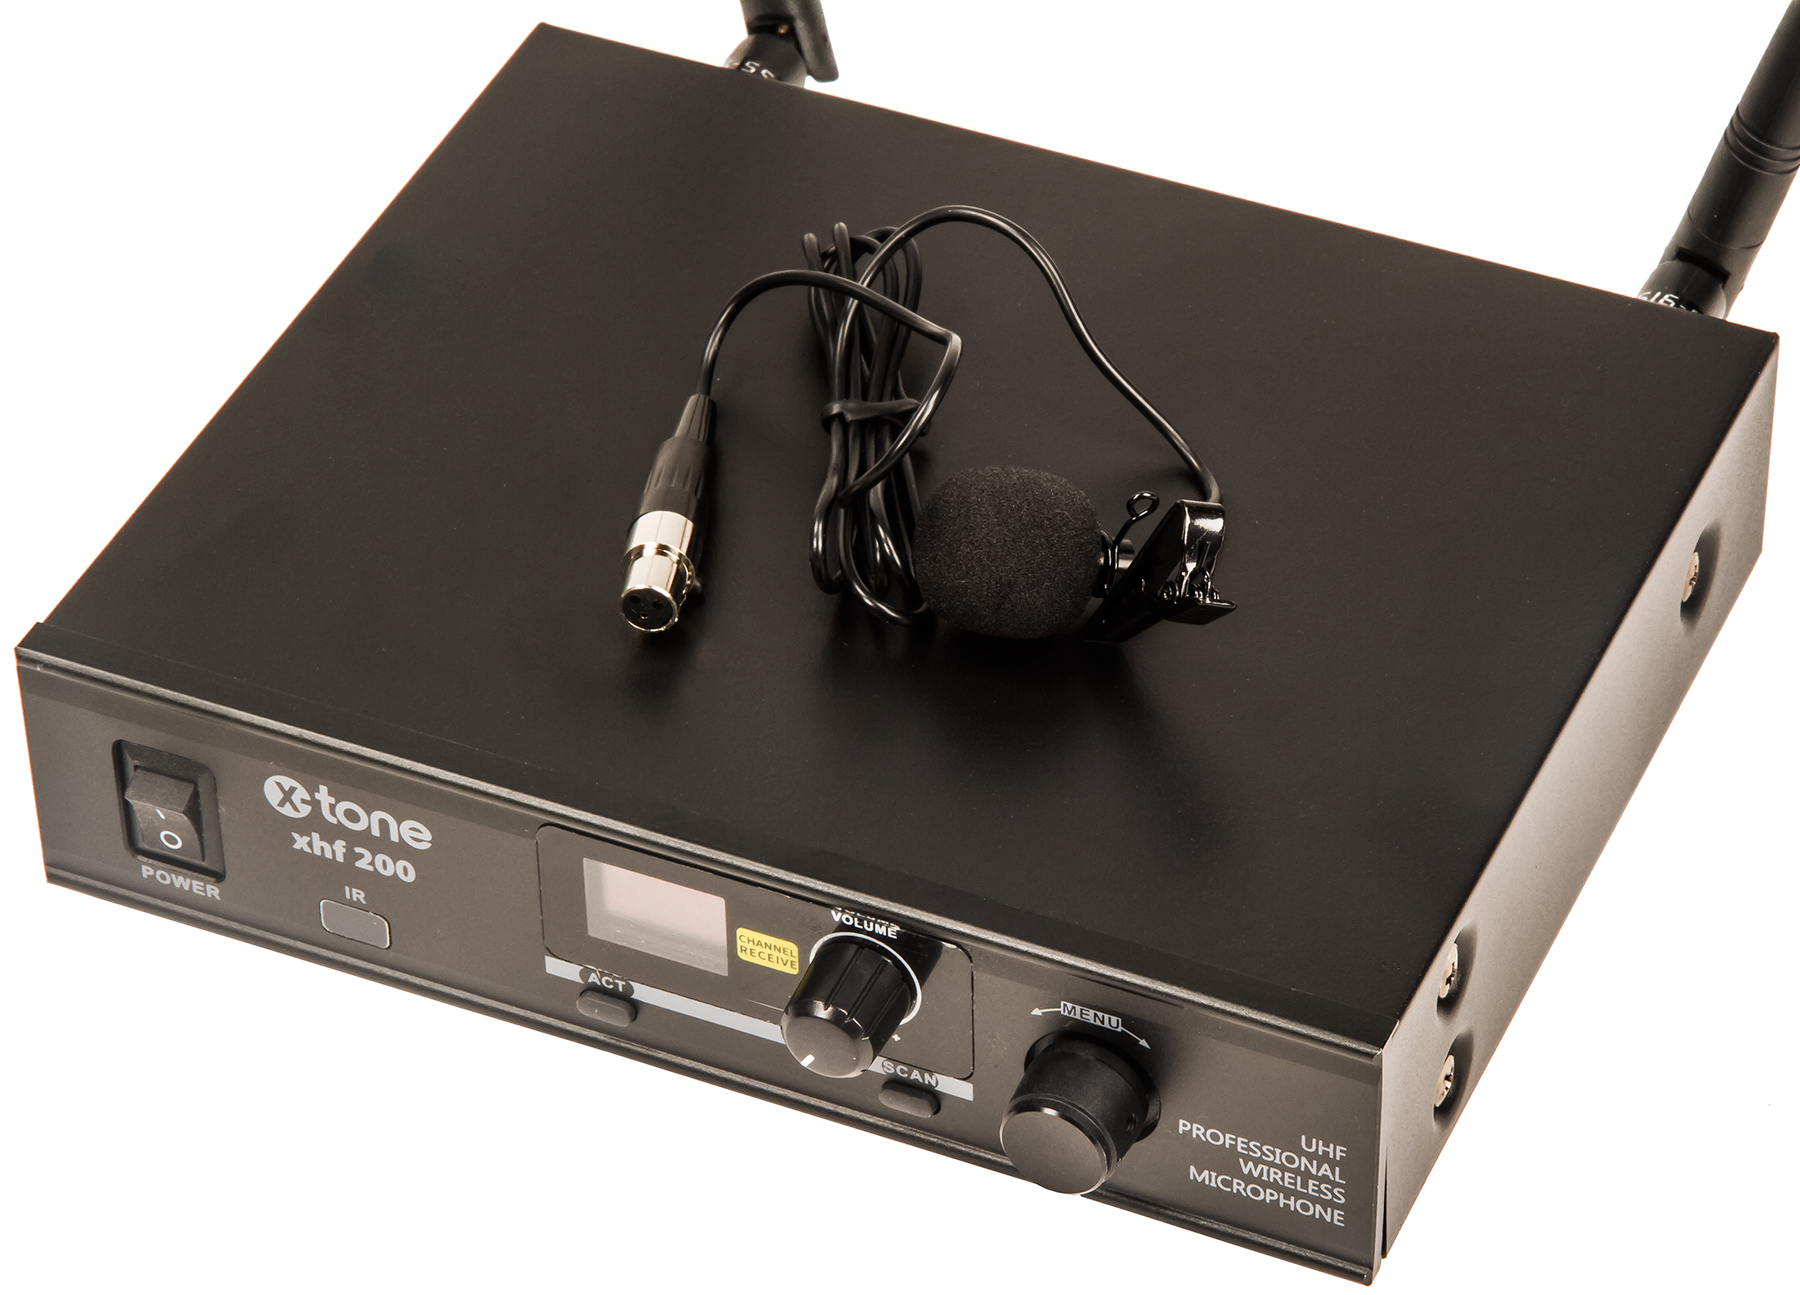 X-tone Xhf200l Systeme Hf Micro Cravate Multi Frequences - Wireless Lavalier microphone - Variation 2